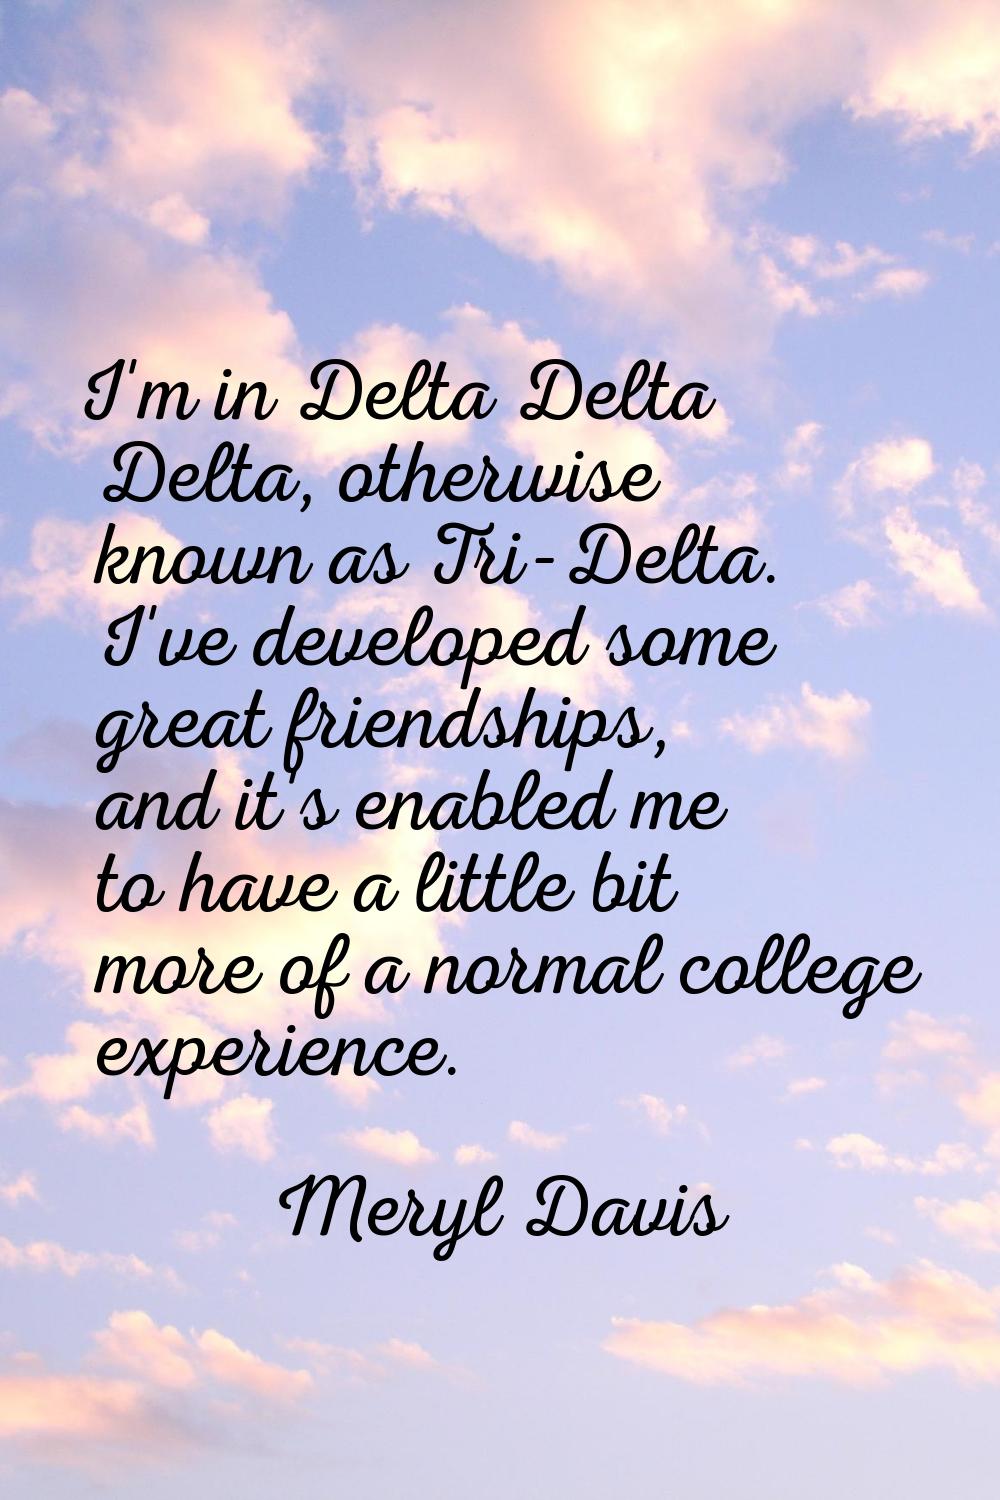 I'm in Delta Delta Delta, otherwise known as Tri-Delta. I've developed some great friendships, and 